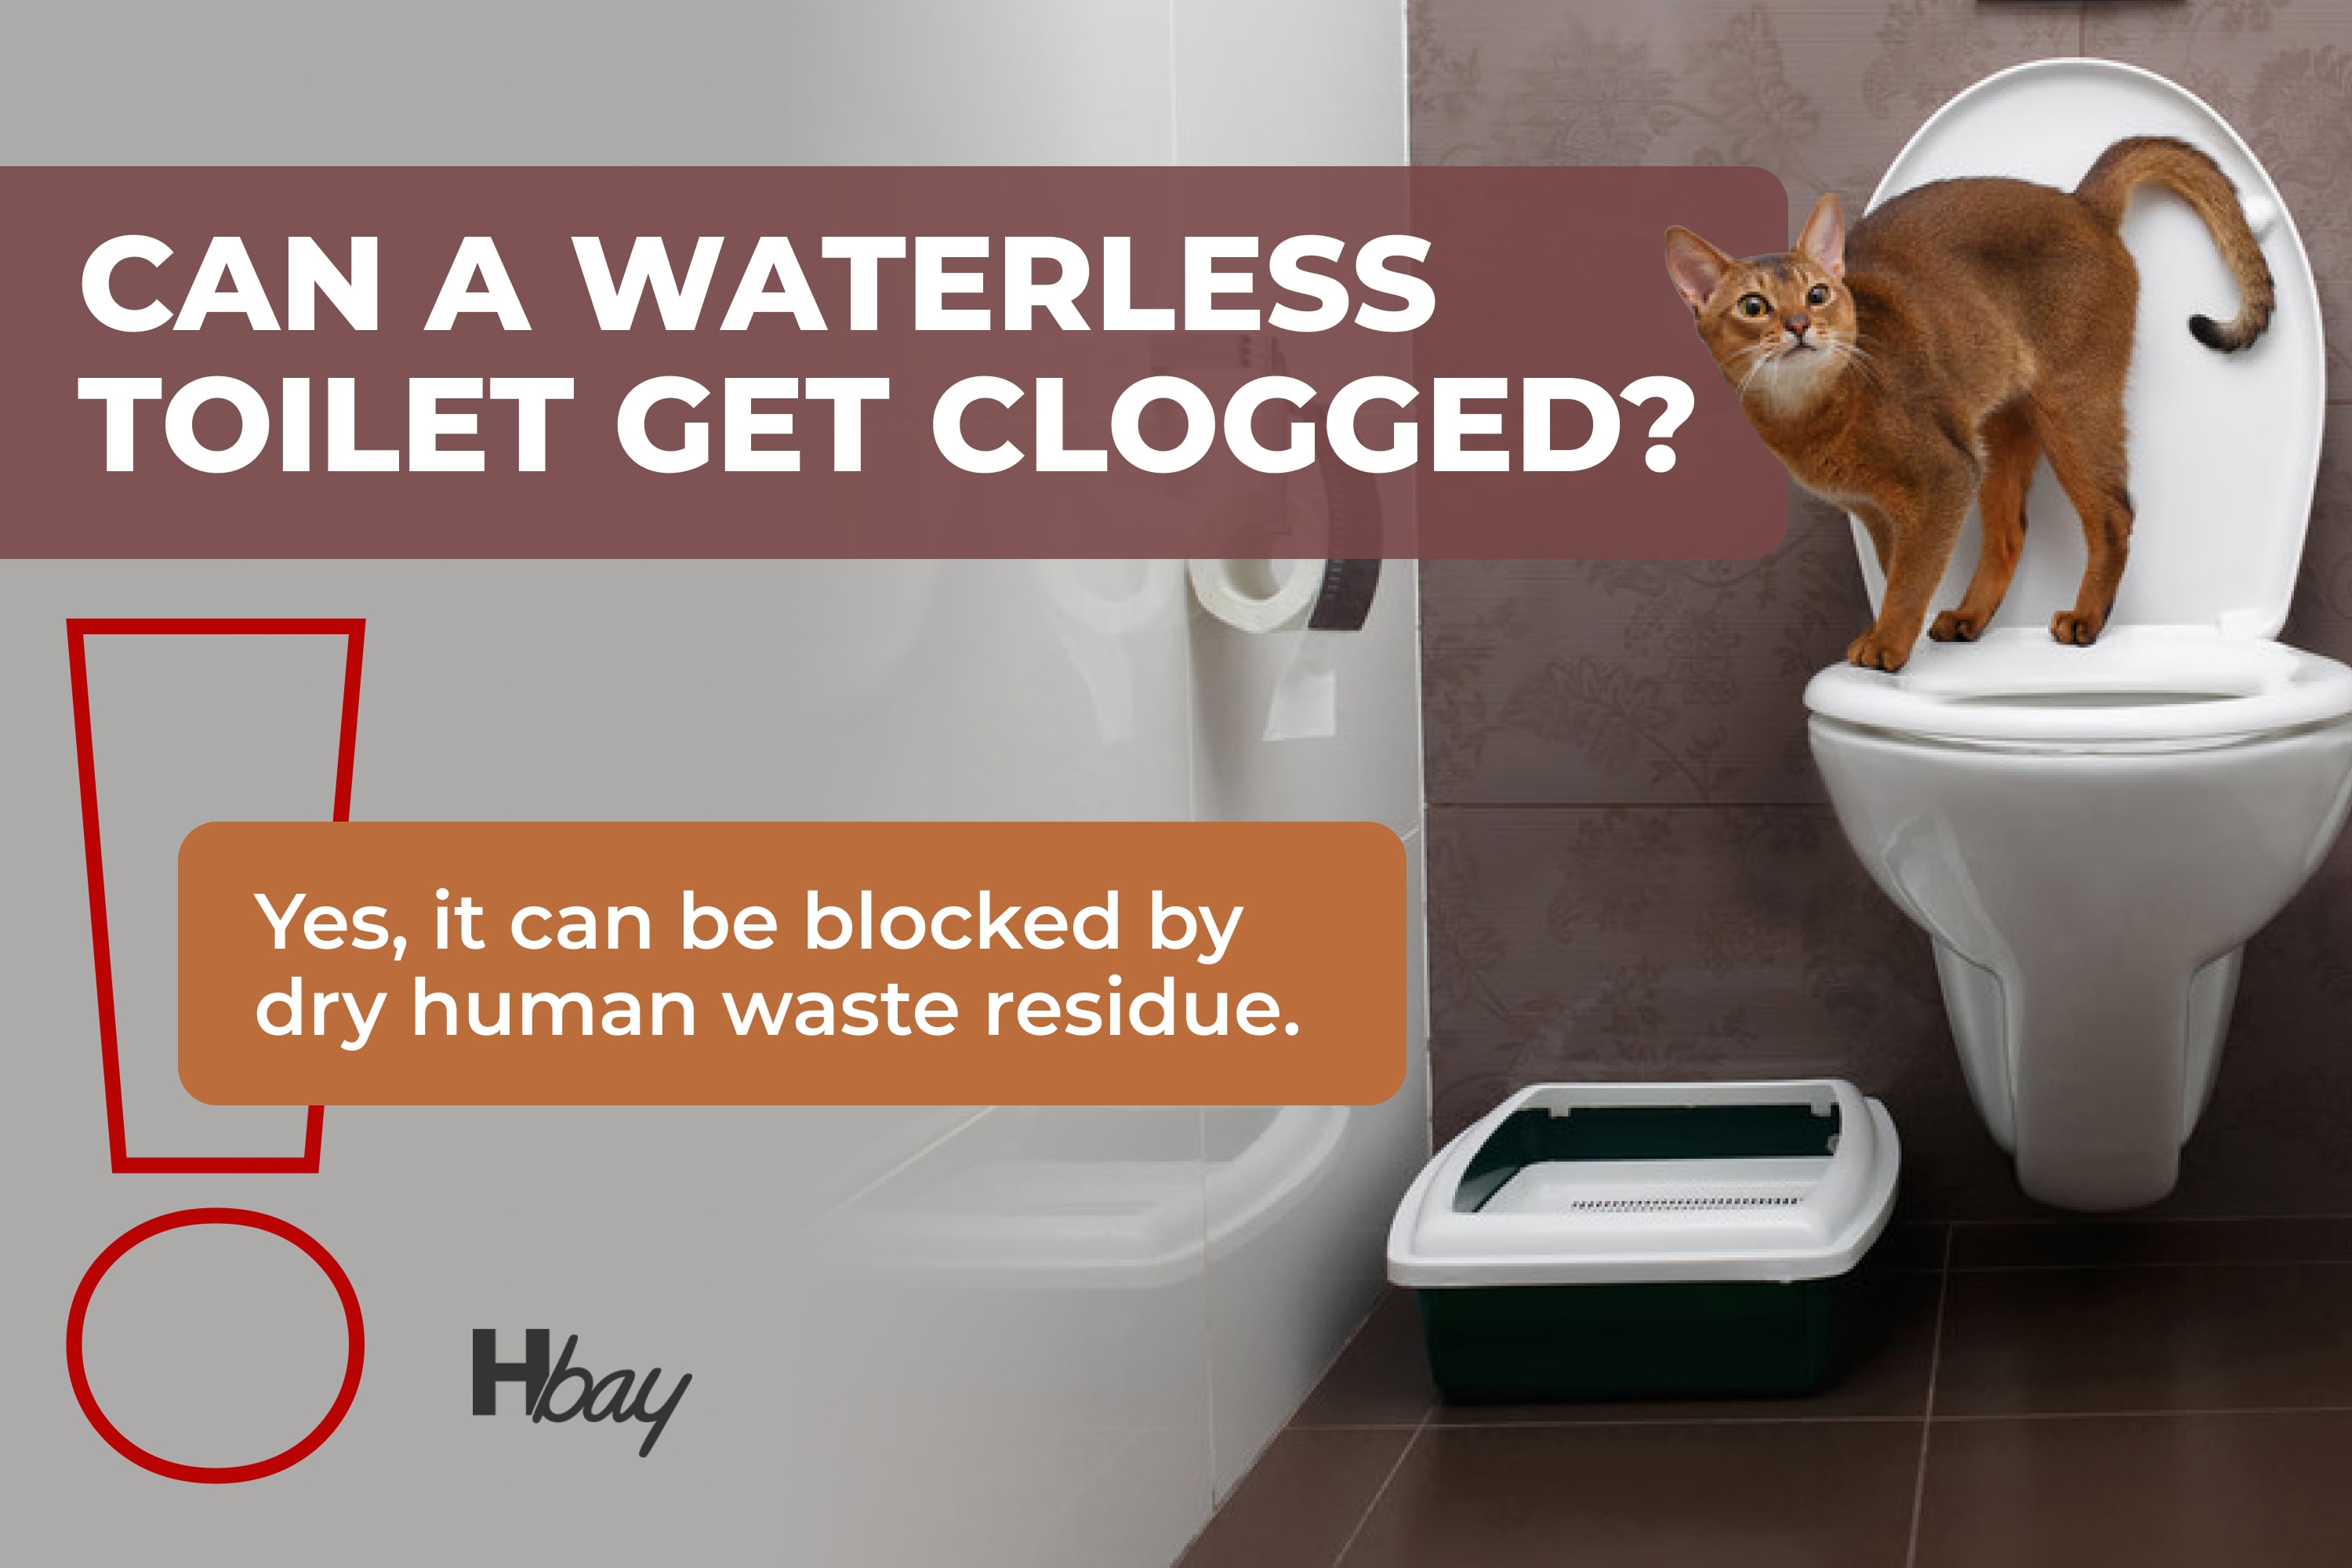 Can a waterless toilet get clogged